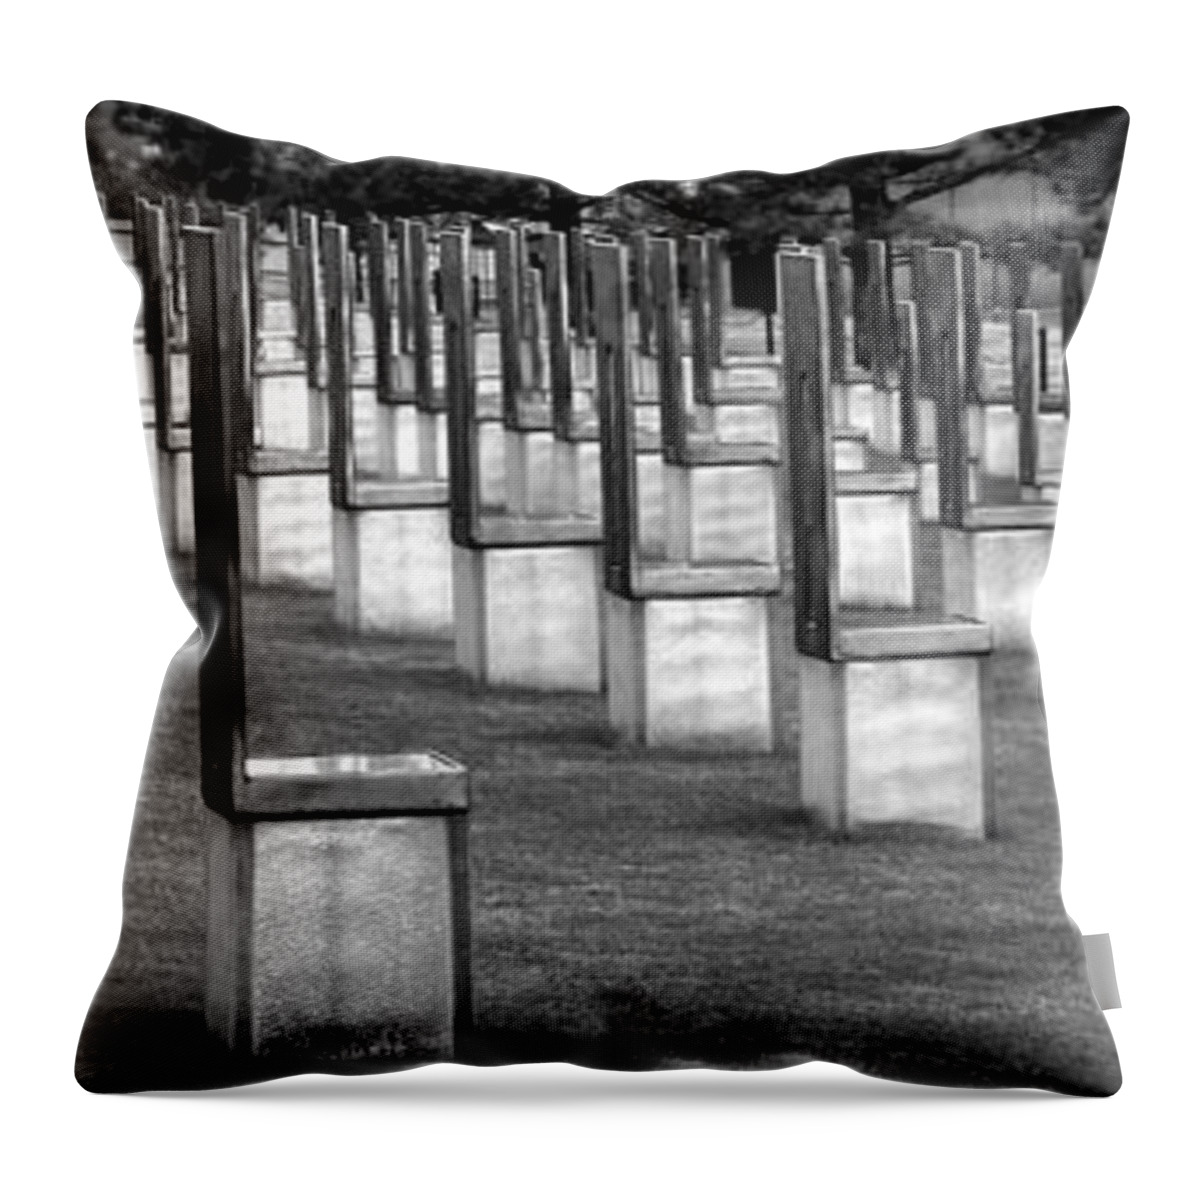 Tragic Throw Pillow featuring the photograph American Tragedy by T Lowry Wilson